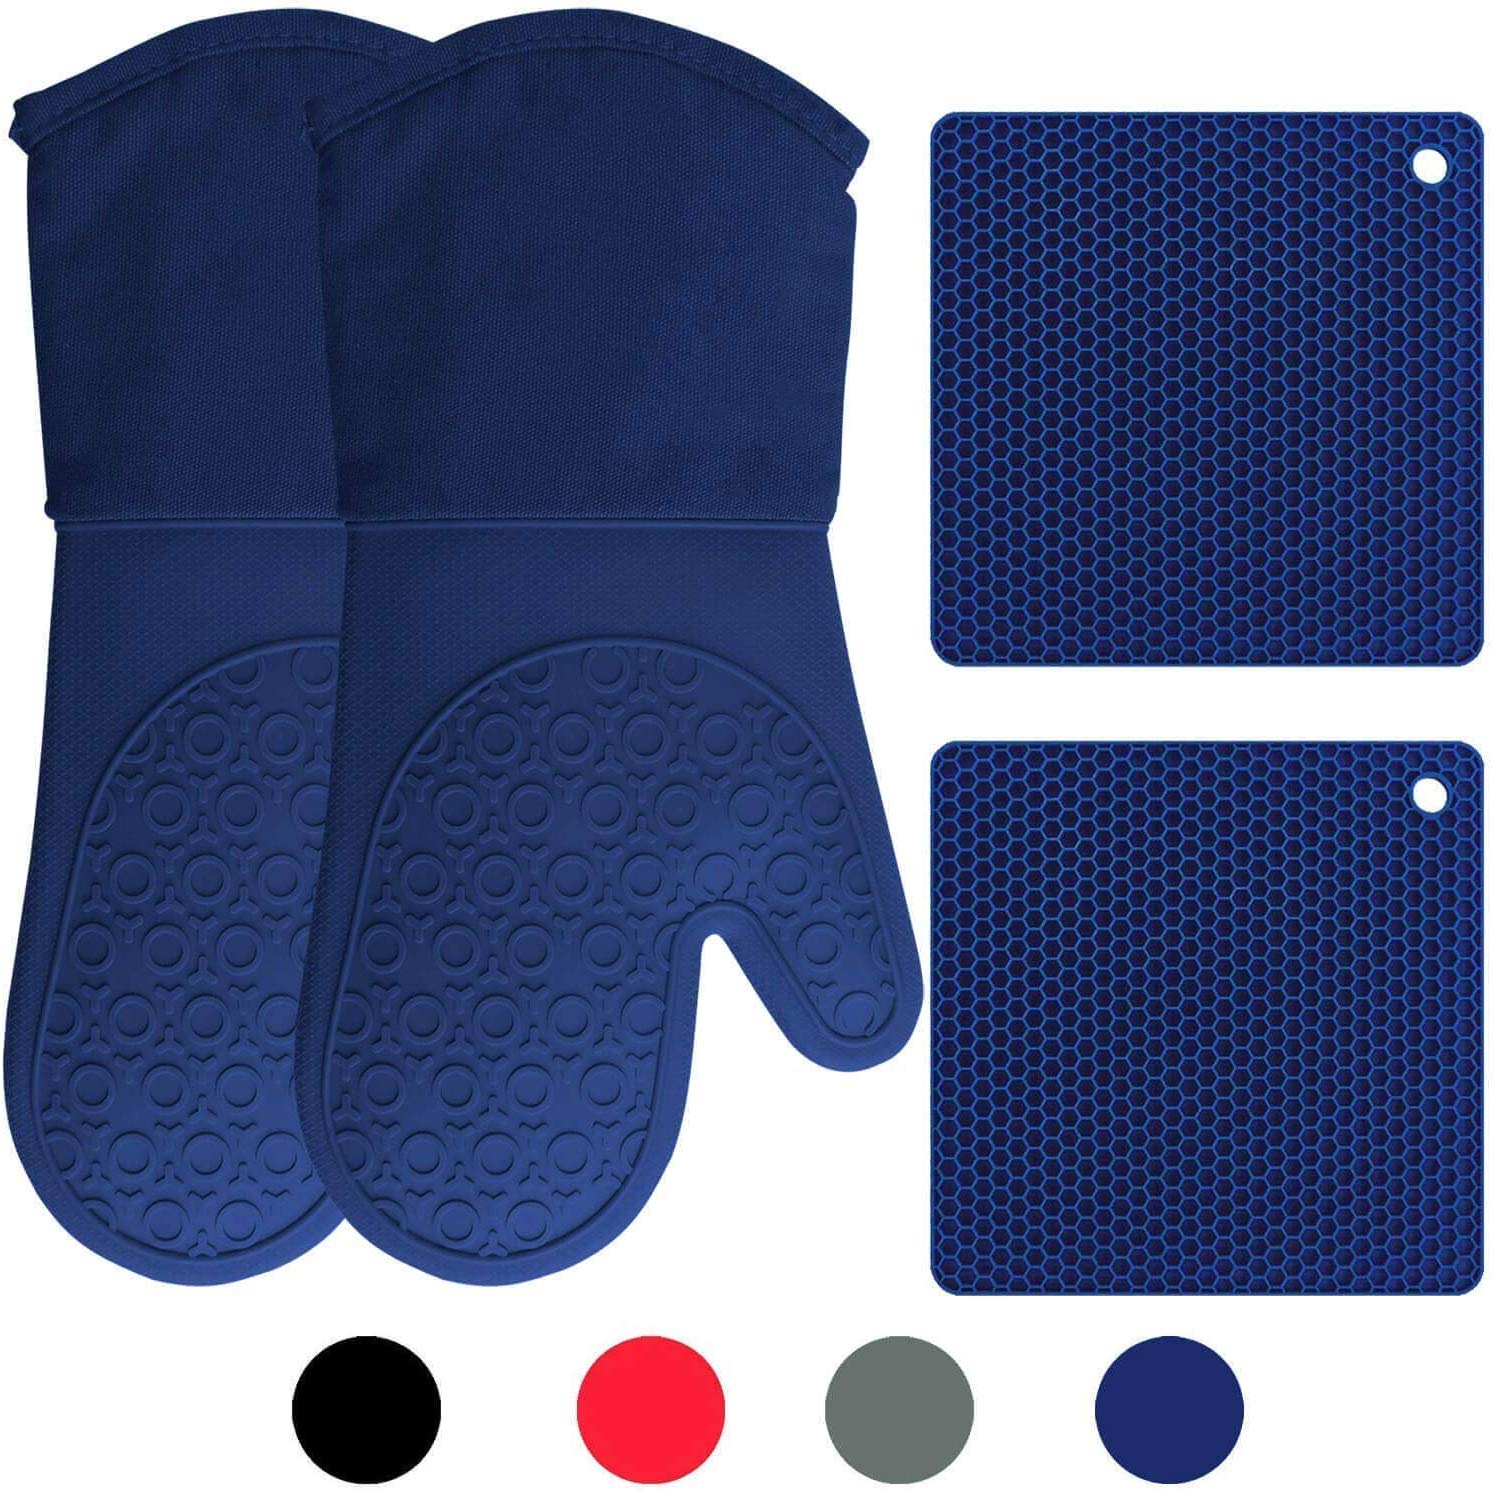 Oven Mitts, Pot Holders, Black Polyester/Rubber Oven Mitts 9x7 in. - 4 Pack